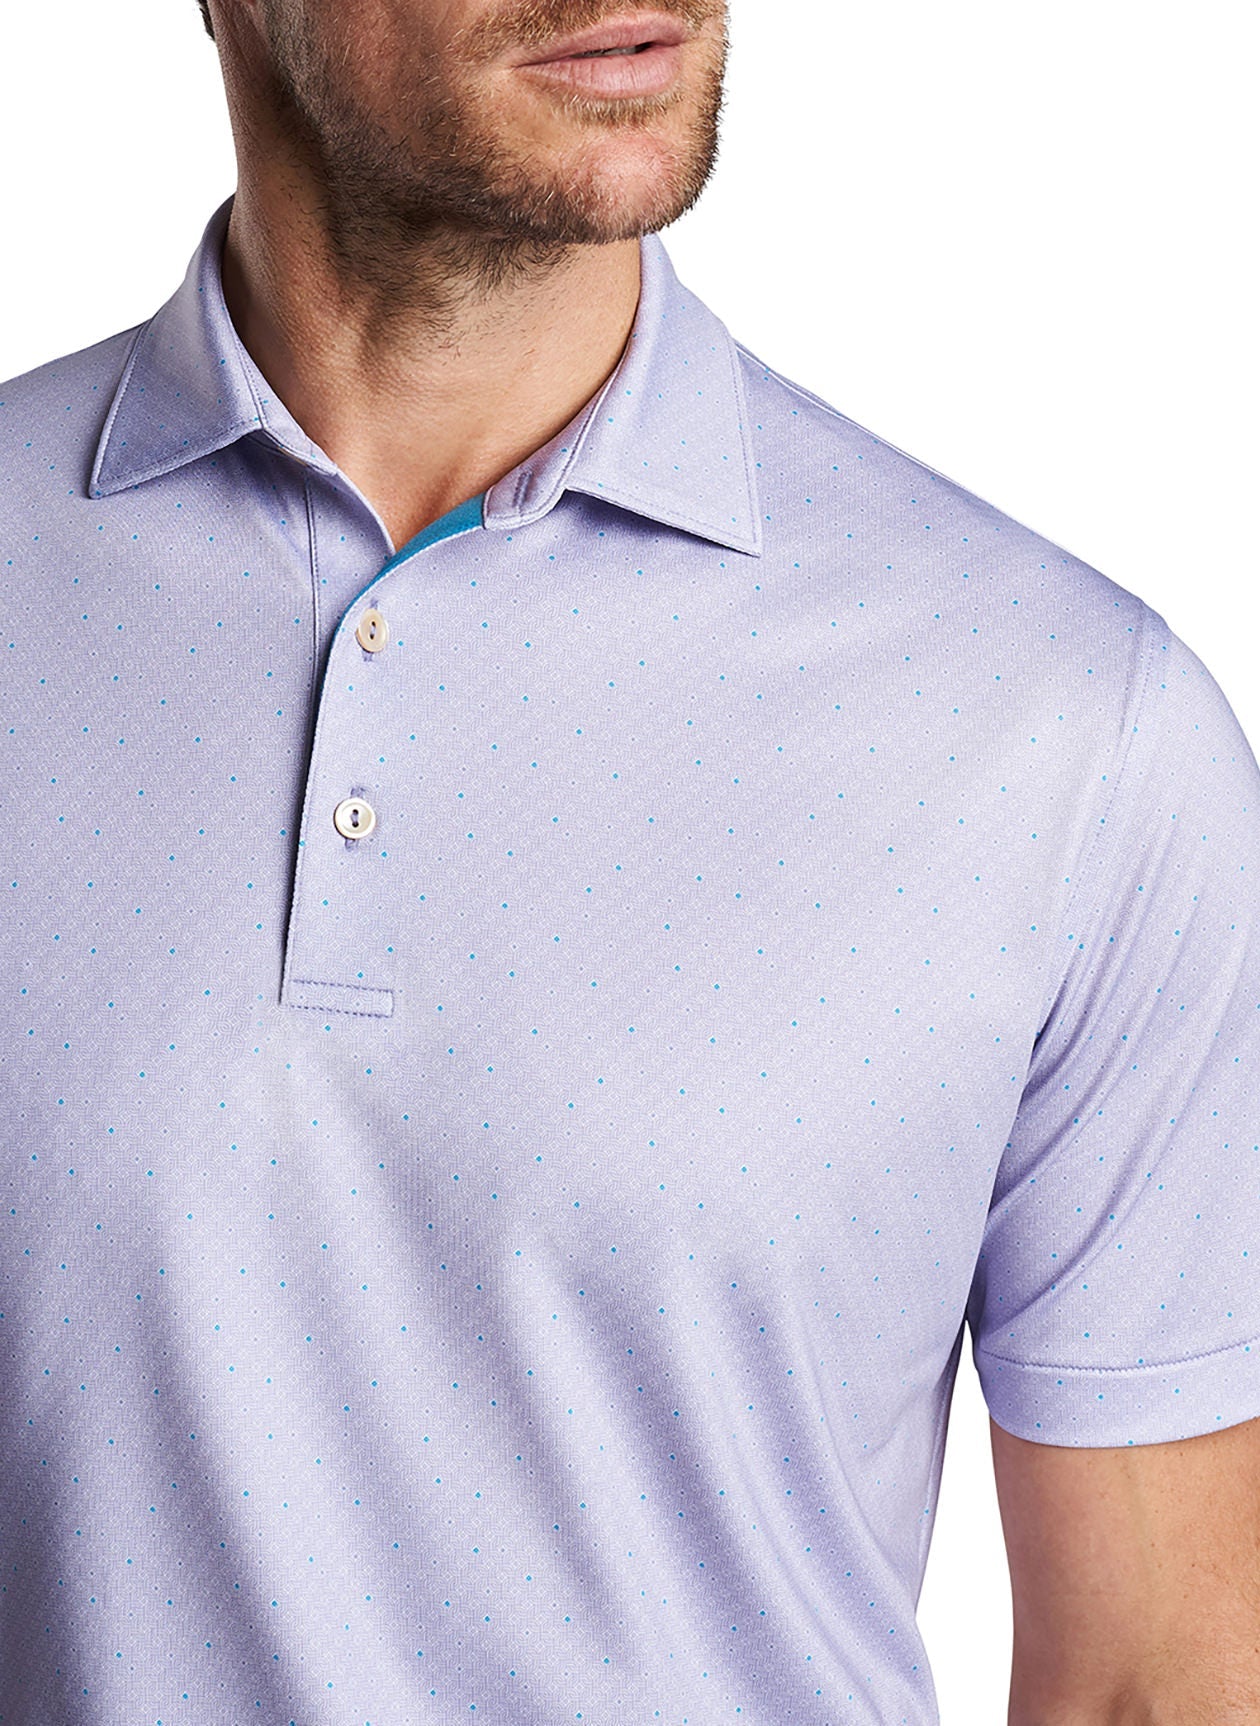 Peter Millar Soriano Performance Jersey Customized Polos, Lavender Fog